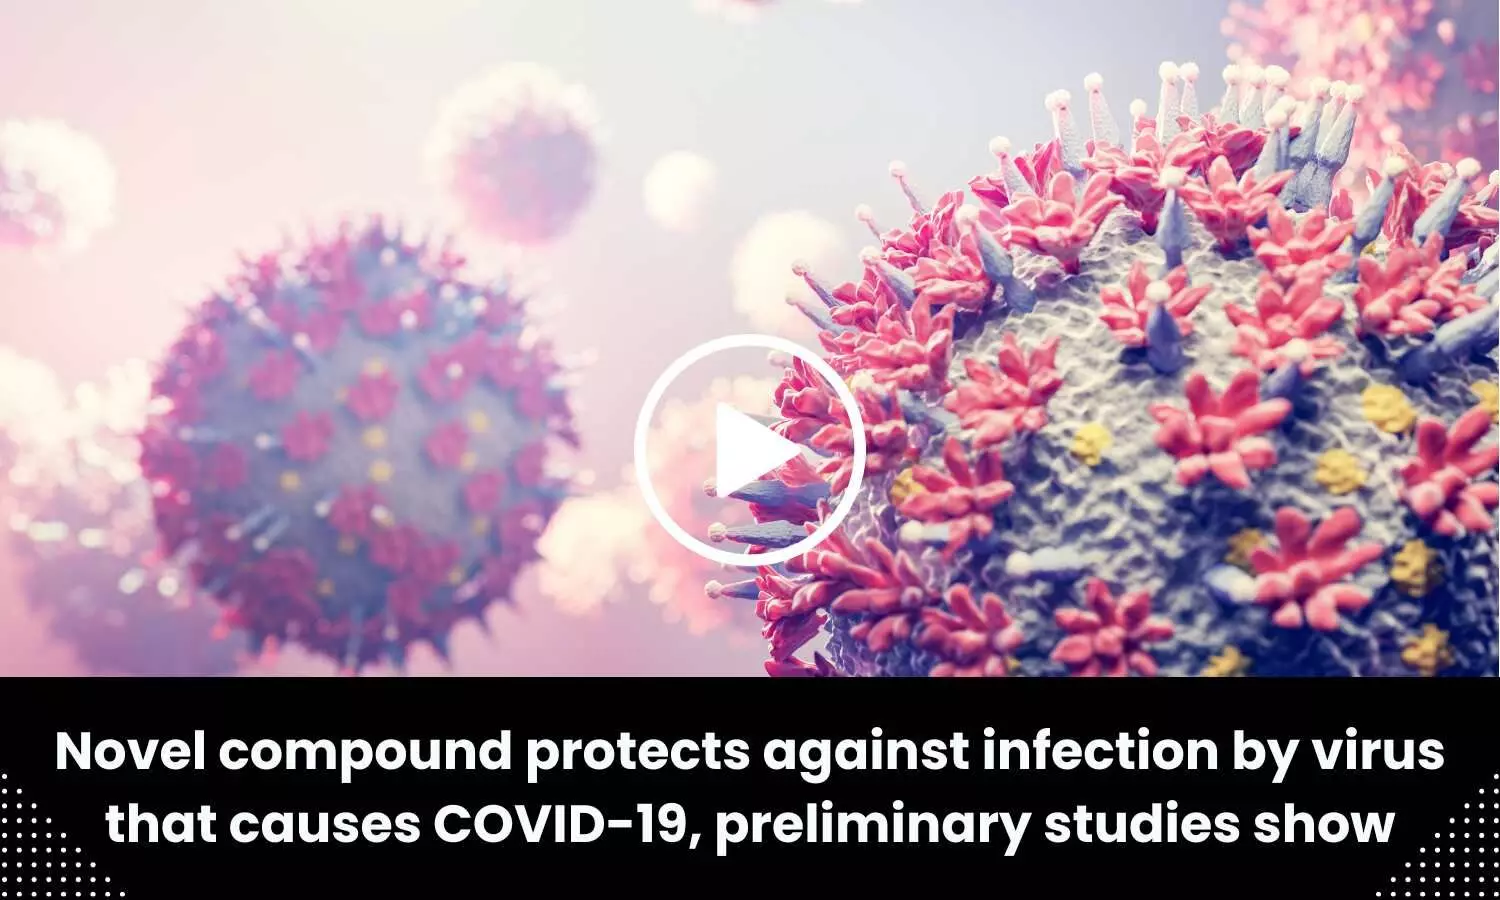 Novel compound protects against infection by virus that causes COVID-19, preliminary studies show